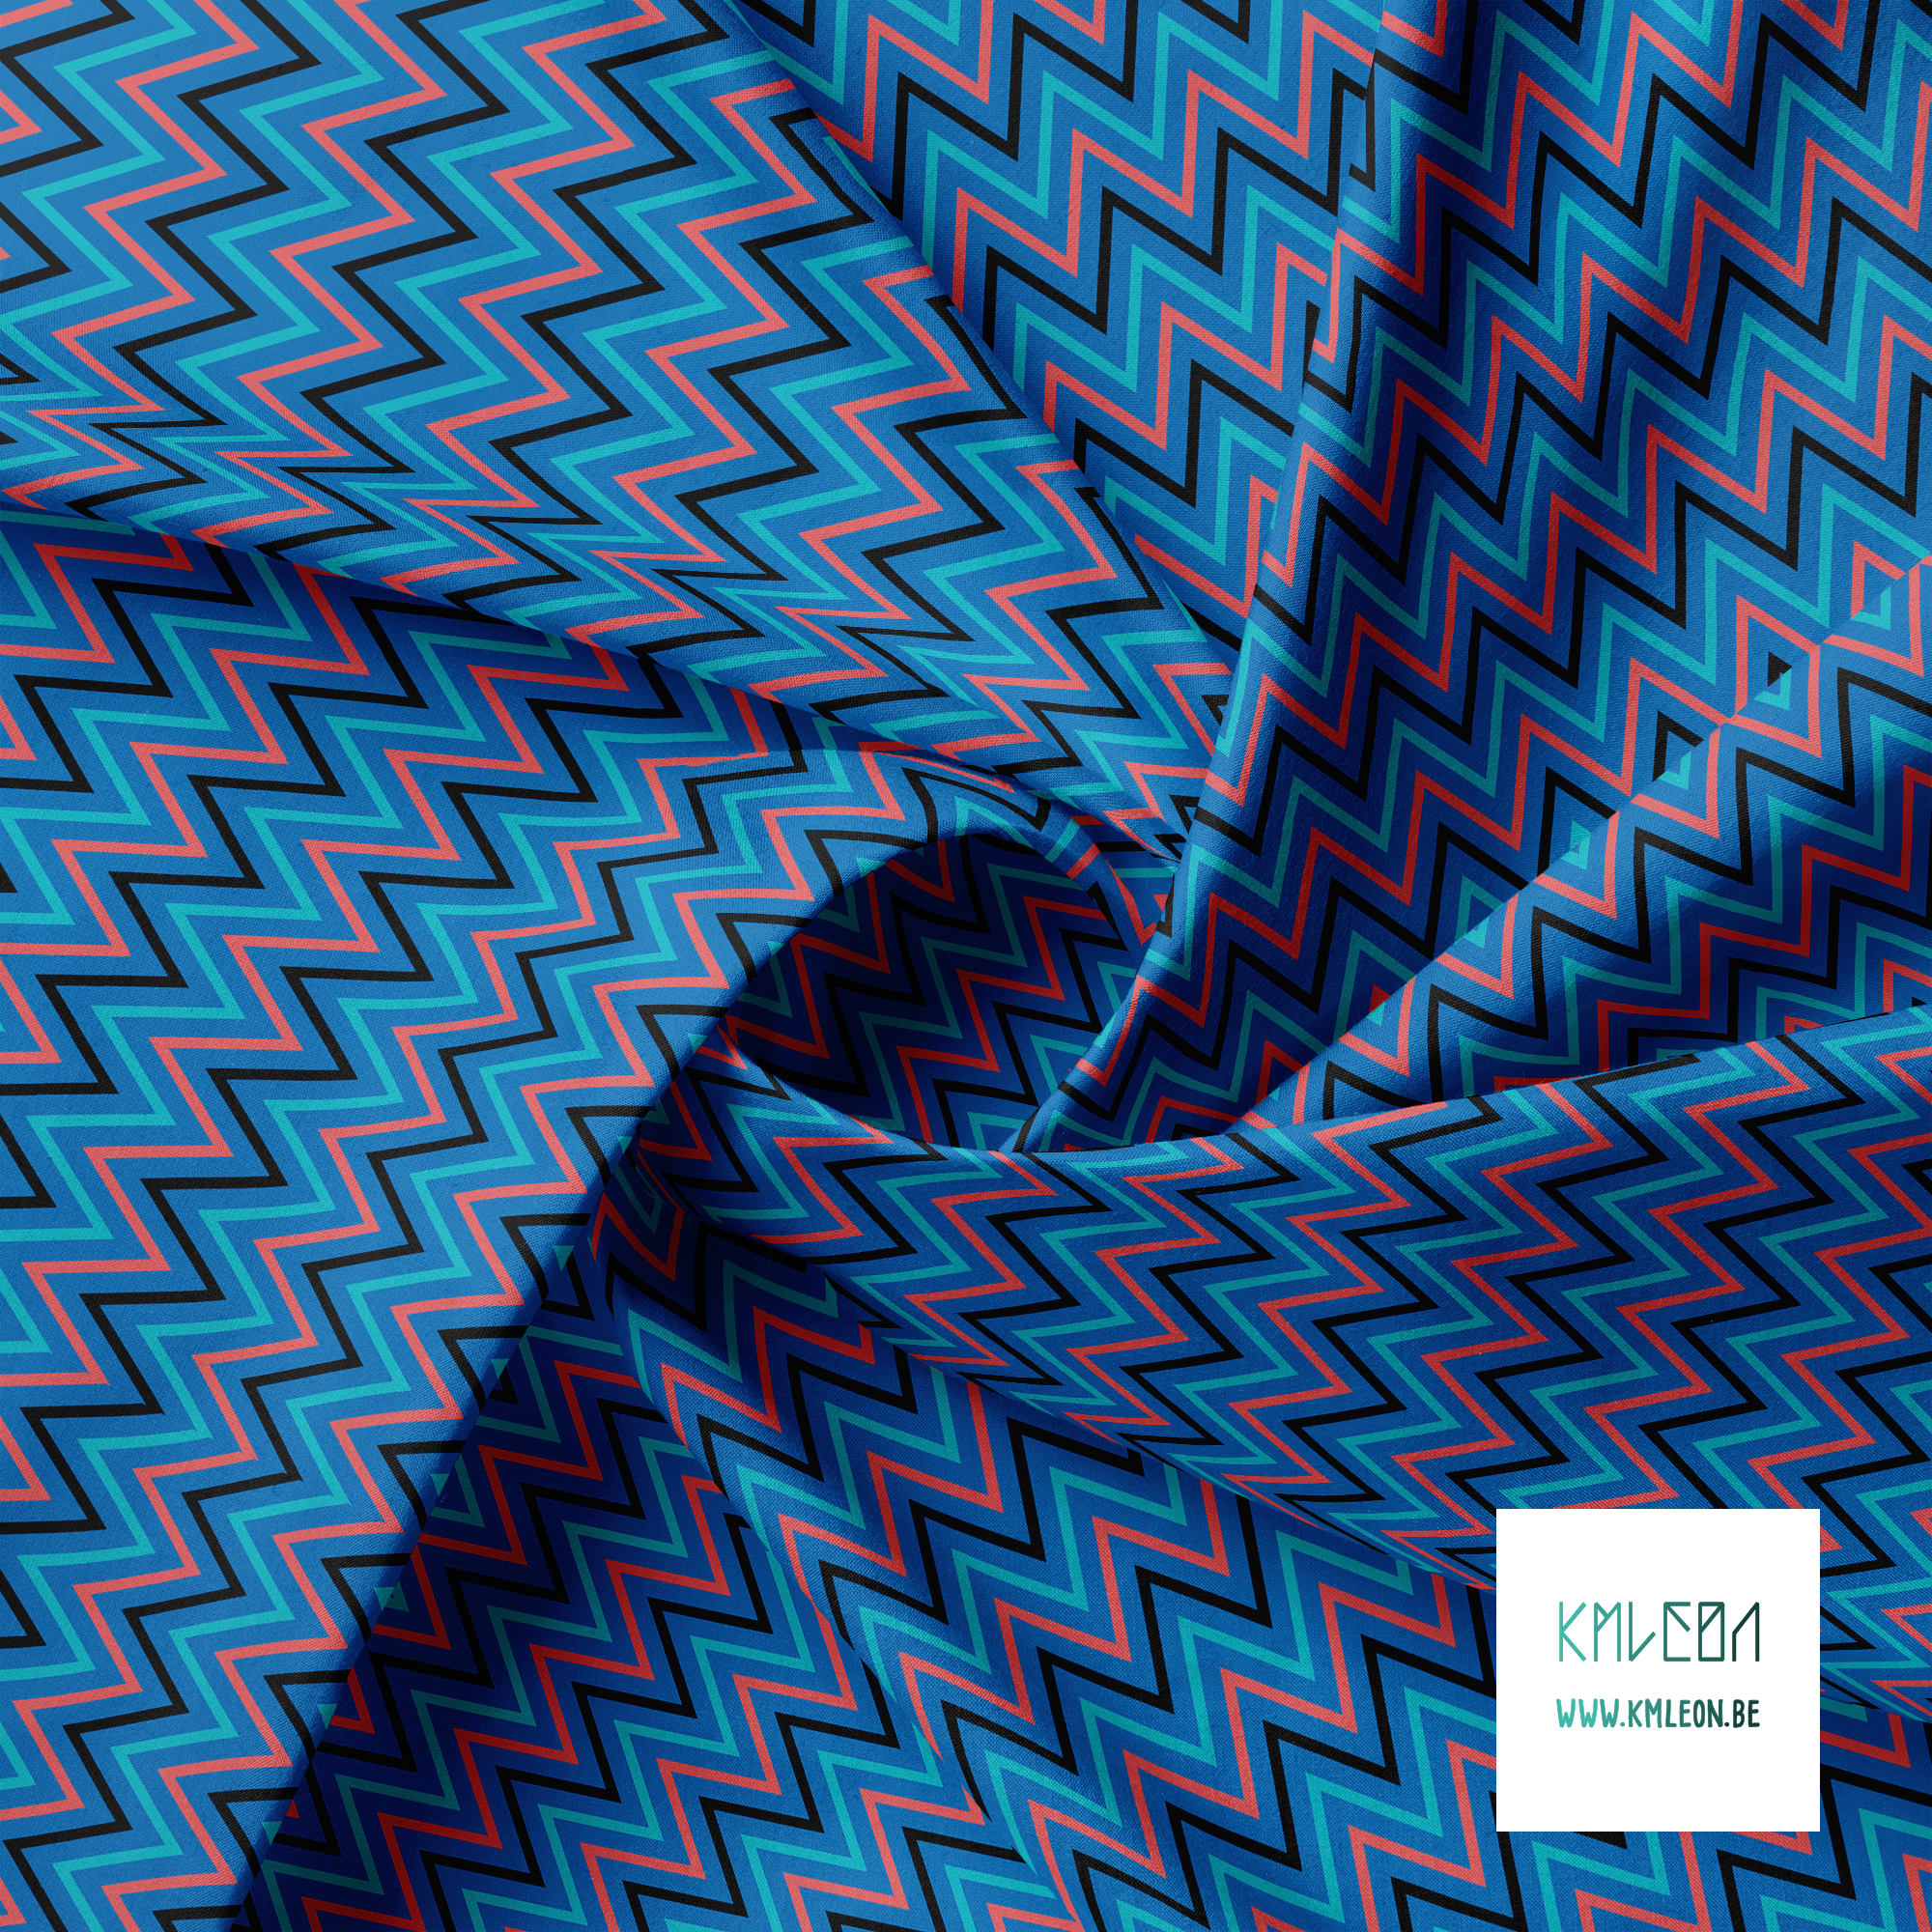 Red, teal and black chevron fabric